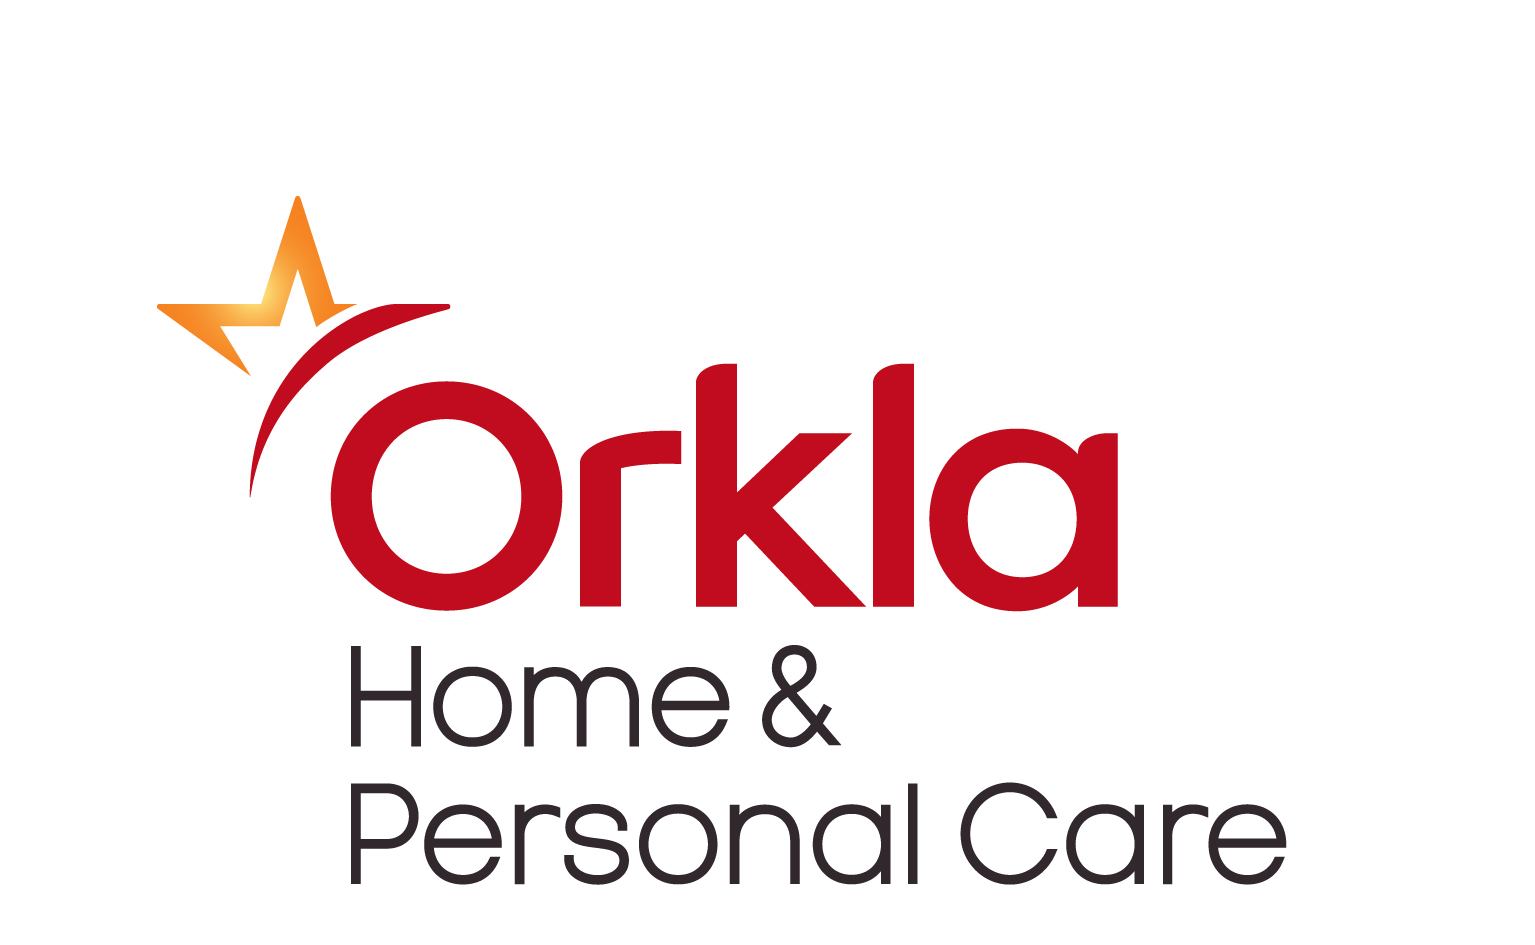 ORKLA HOME AND PERSONAL CARE AS logo